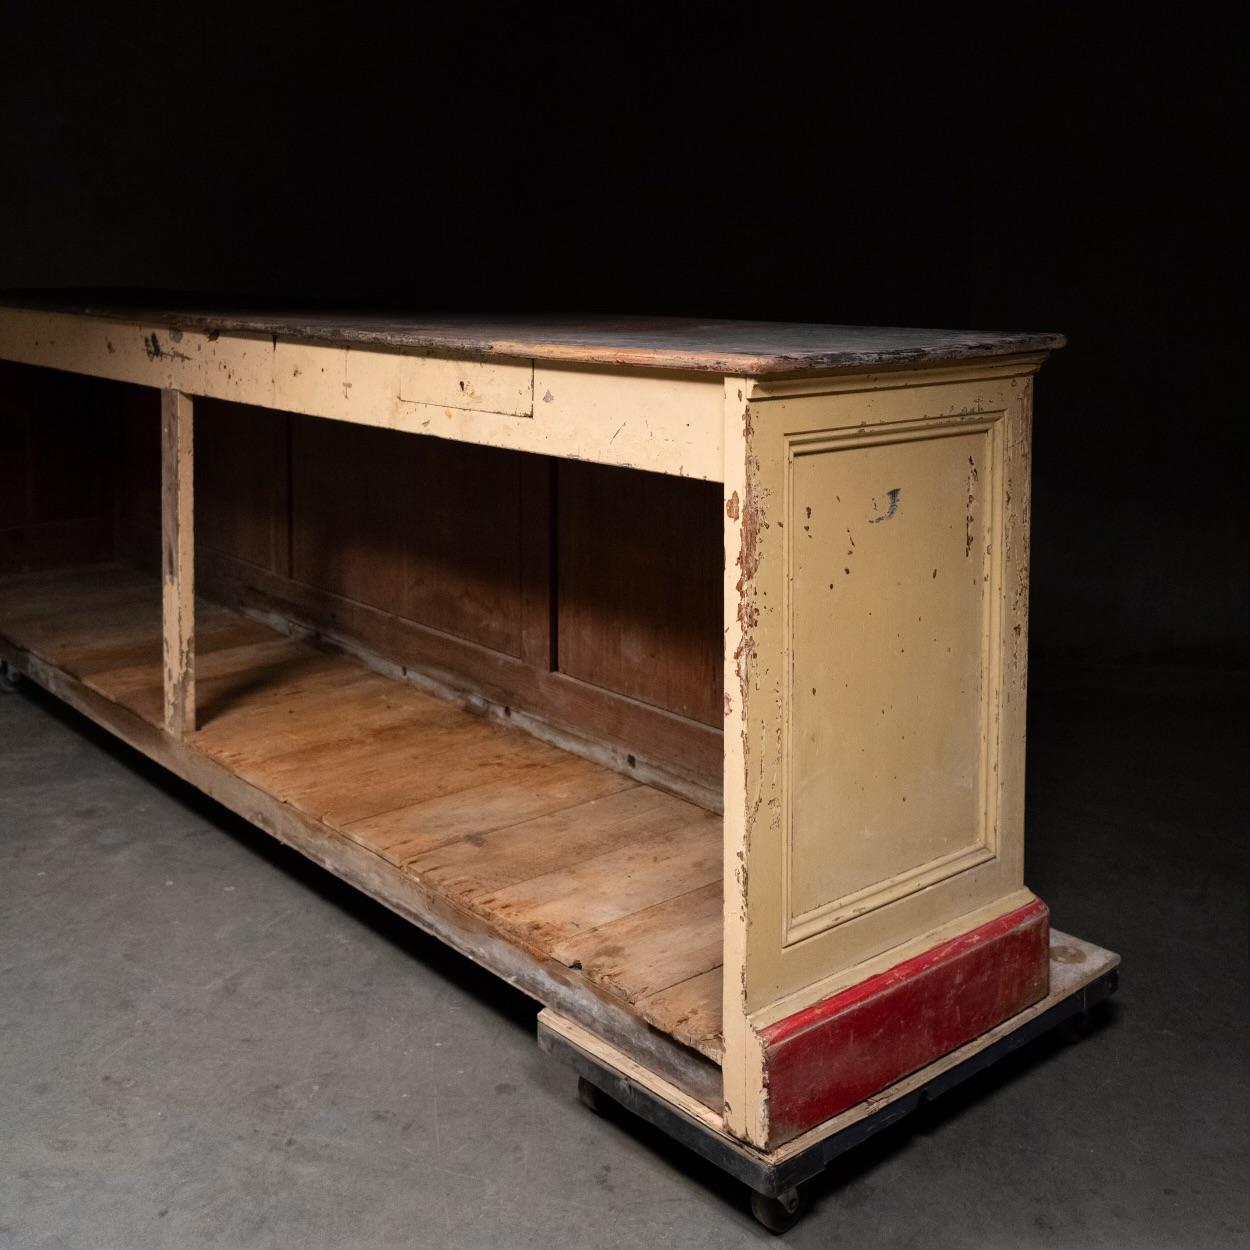 A very nice rare 19th c store counter from France, showing multi panels , tall detailed mouldings work, all in original painted finish . 

Counter has original floor  and small cash drawer .   We left all the finish as us , please feel free to